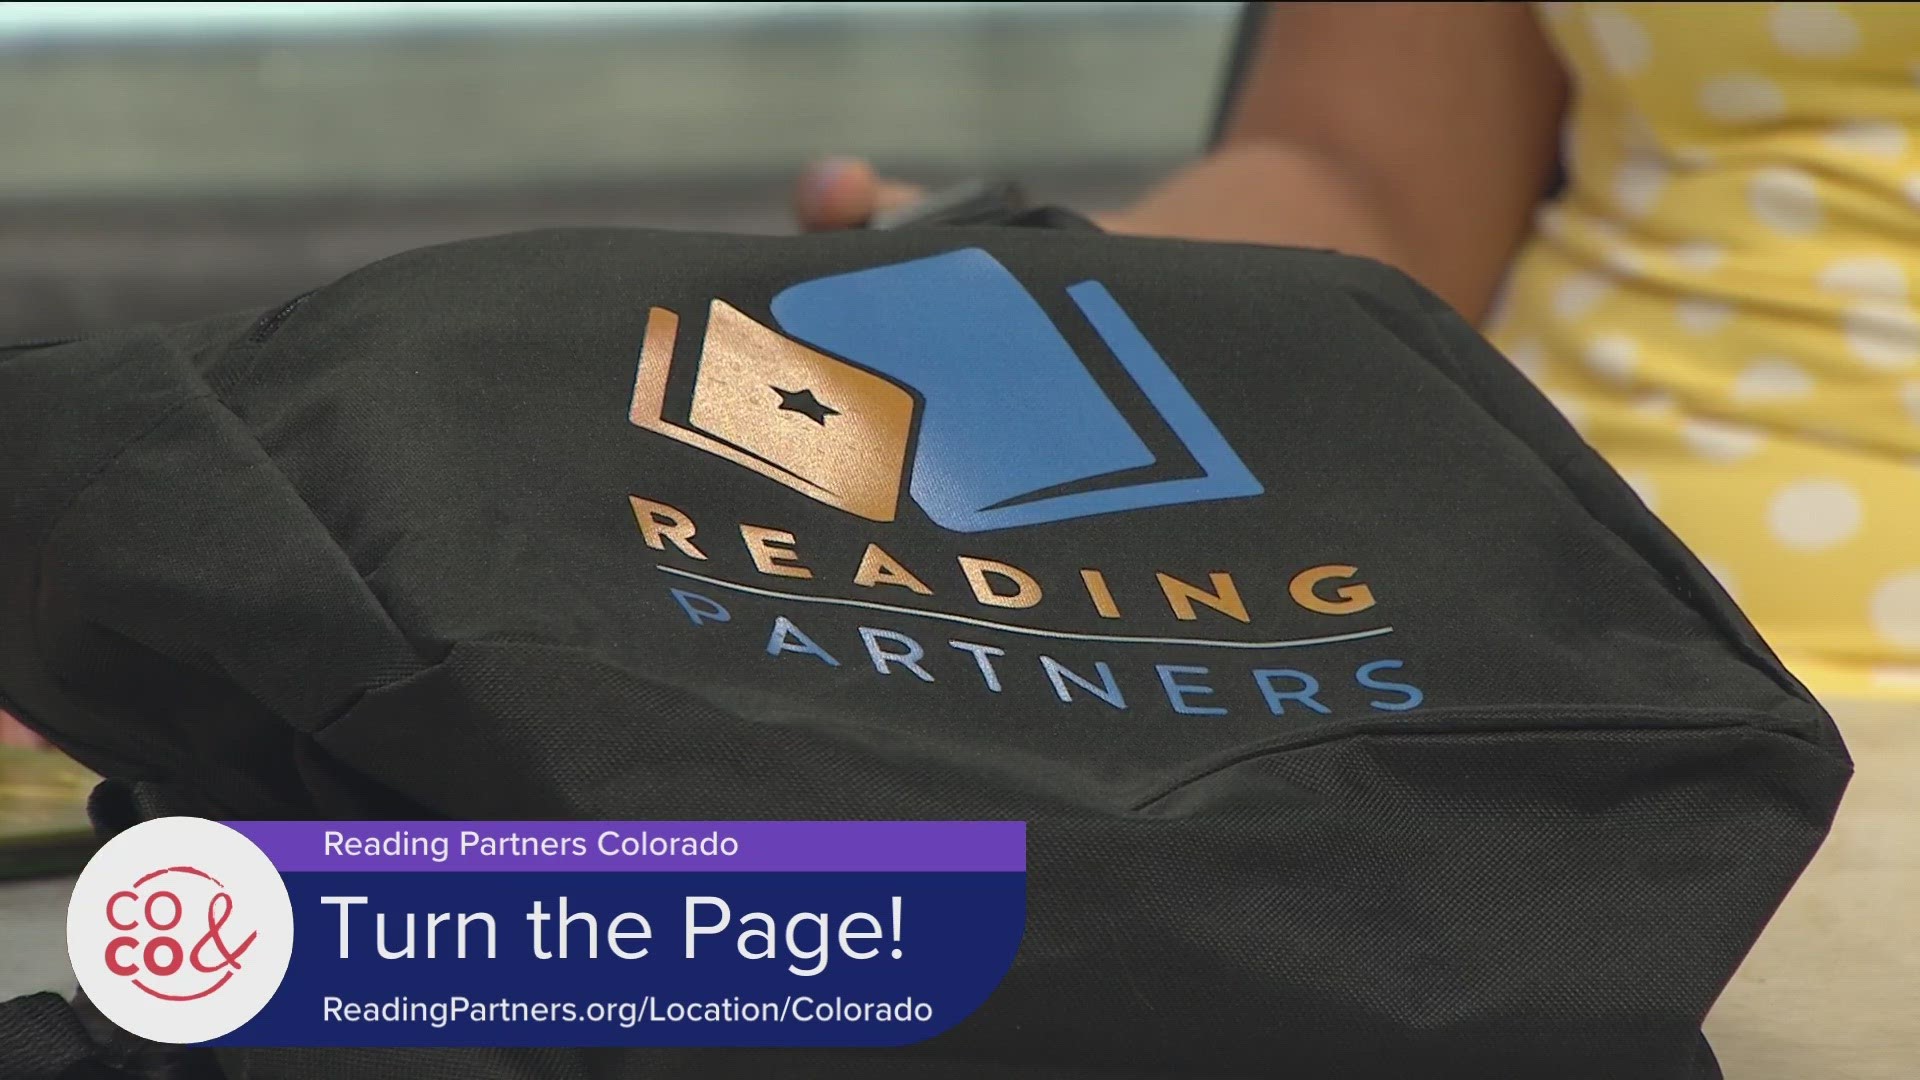 Start your next chapter by getting involved with Reading Partners. Learn more at ReadingPartners.org/Location/Colorado.